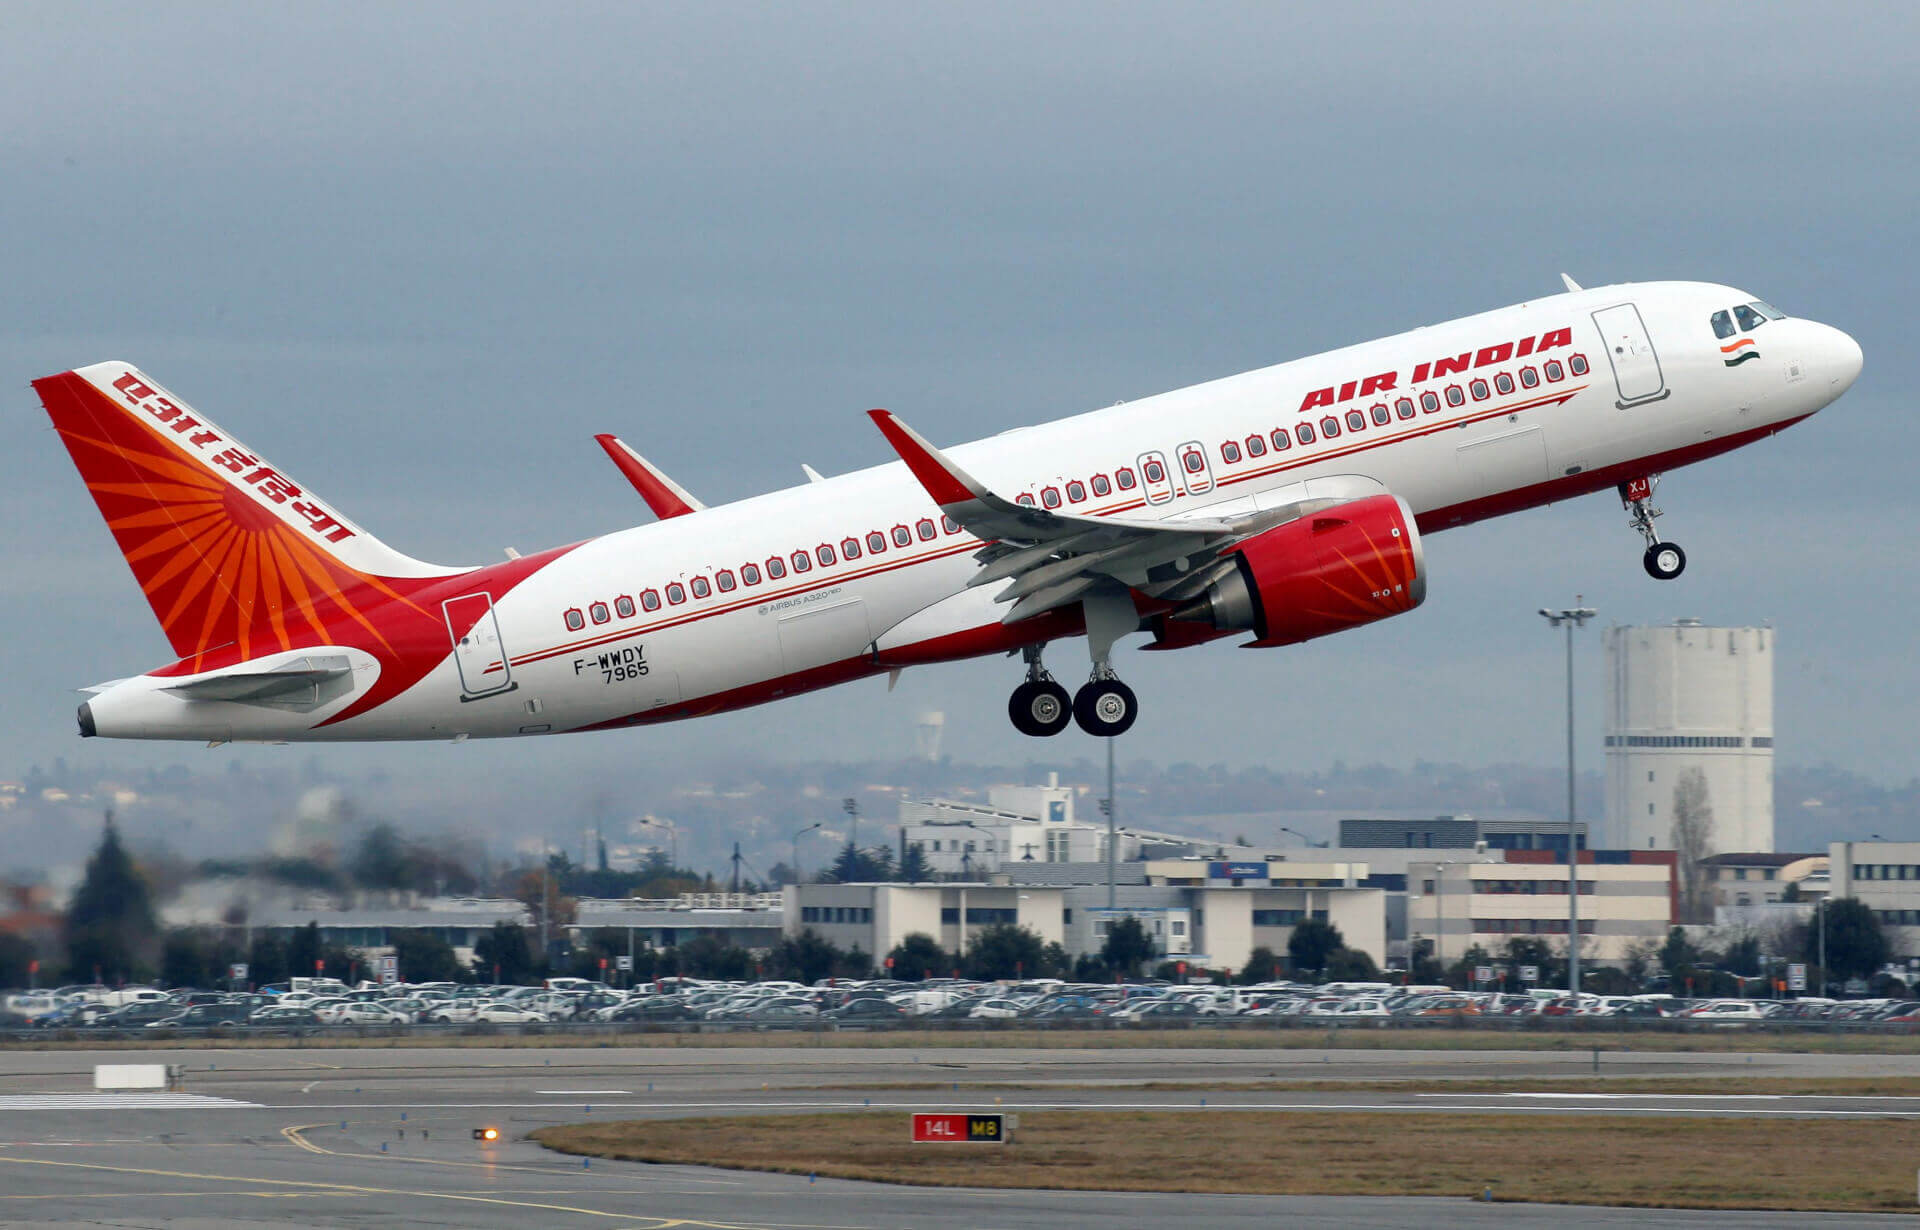 Air India Sending Reserve Plane After Emergency Landing in Russia, US Monitoring Situation